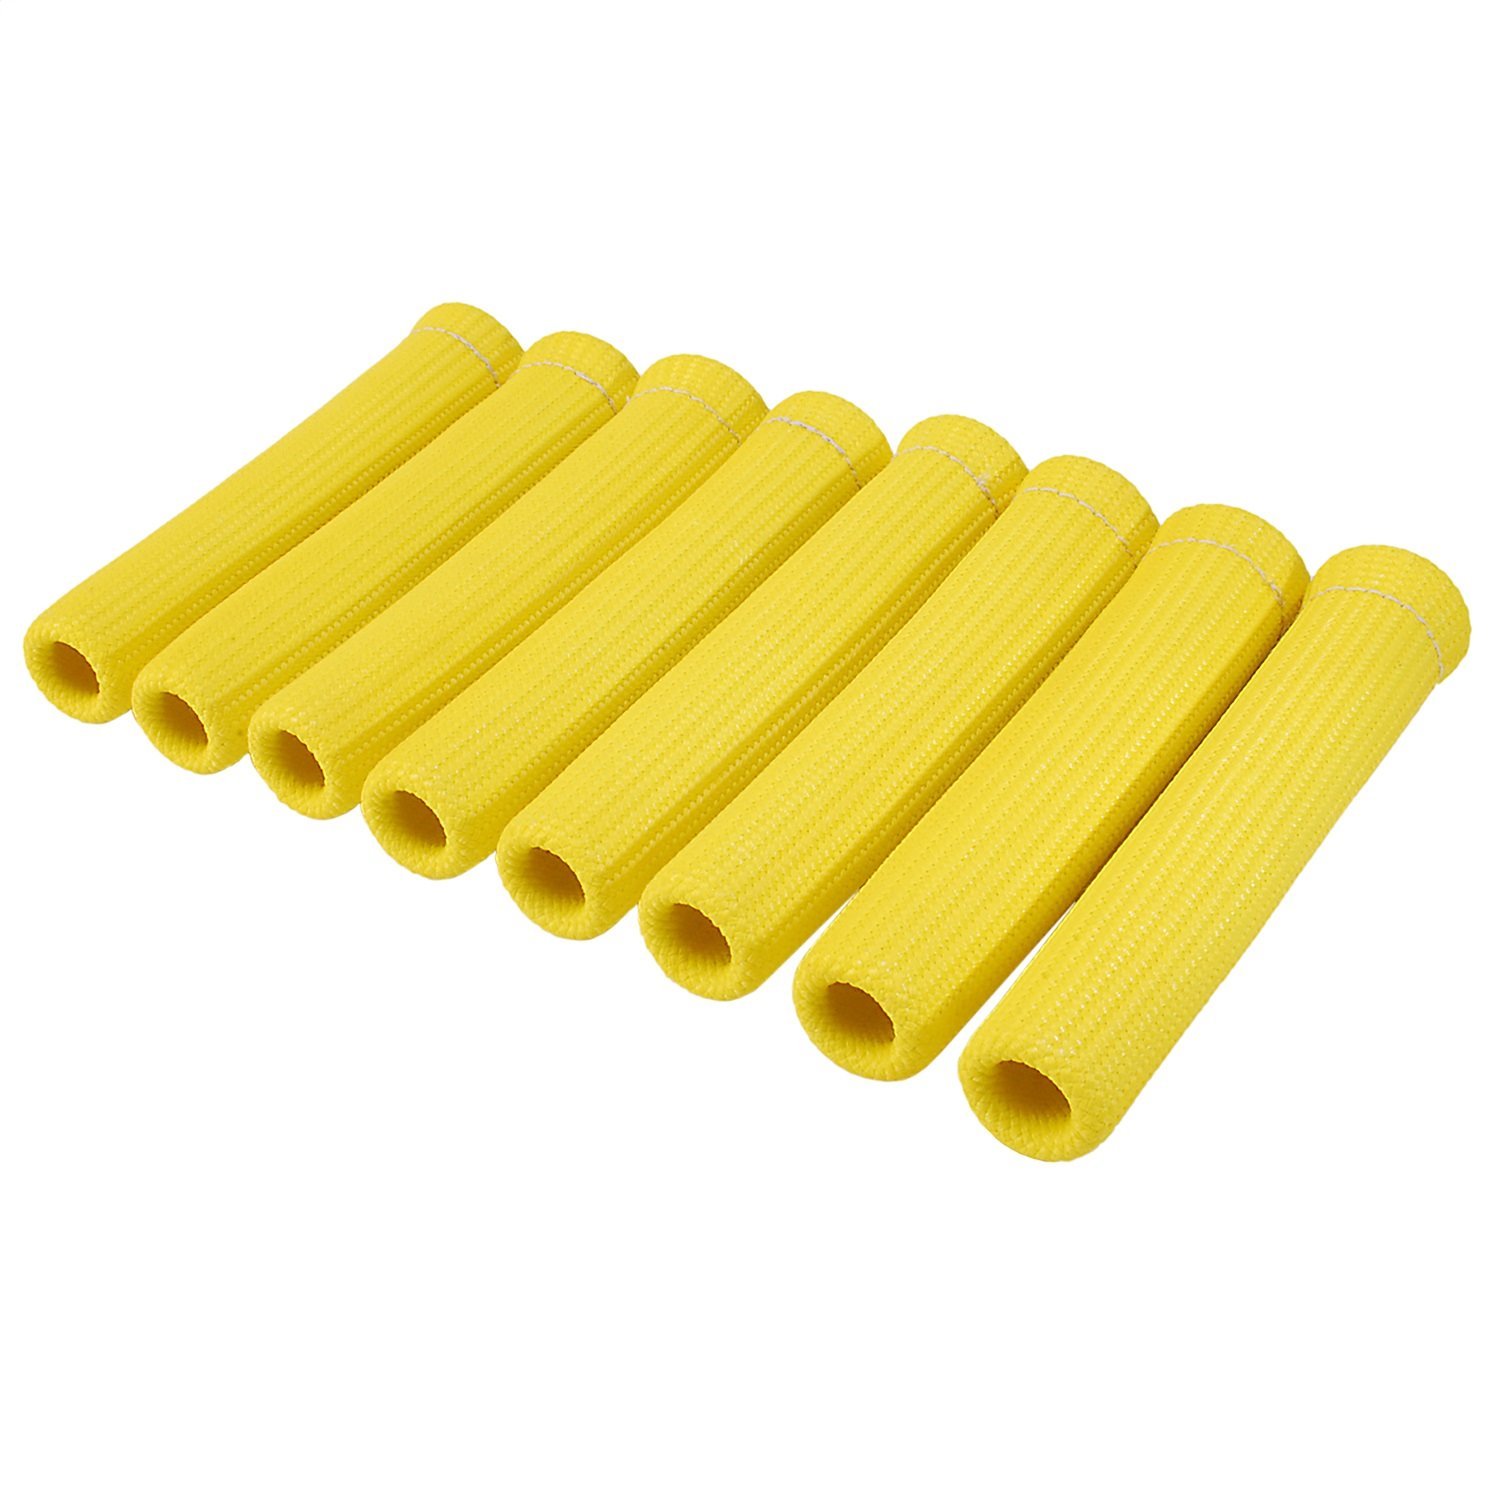 YELLOW PROTECT-A-BOOT 8PK